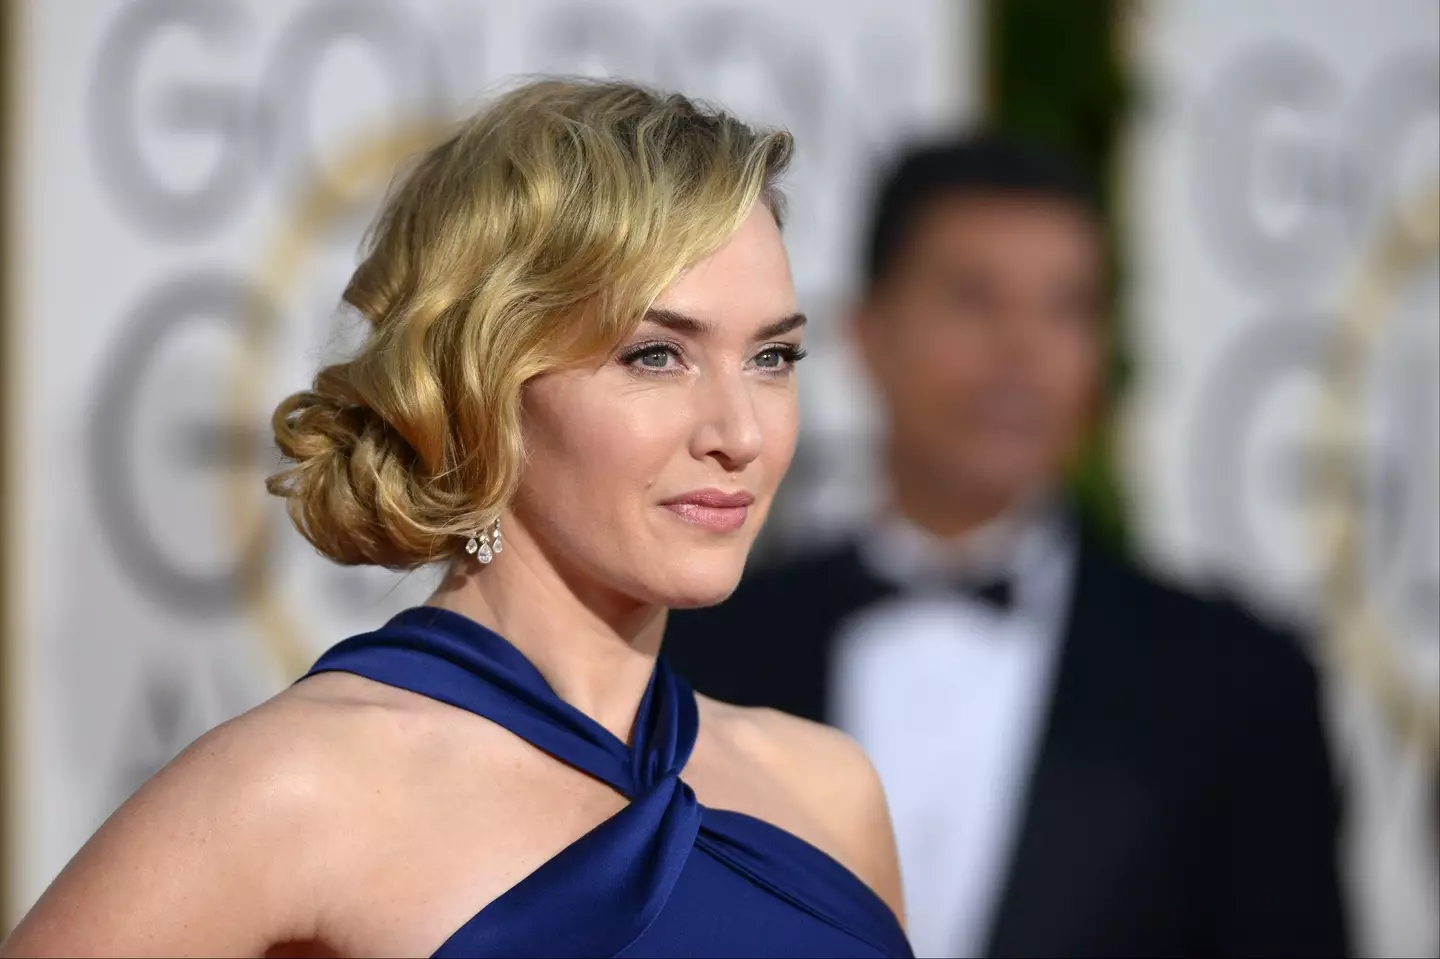 Kate Winslet donated £17,000.